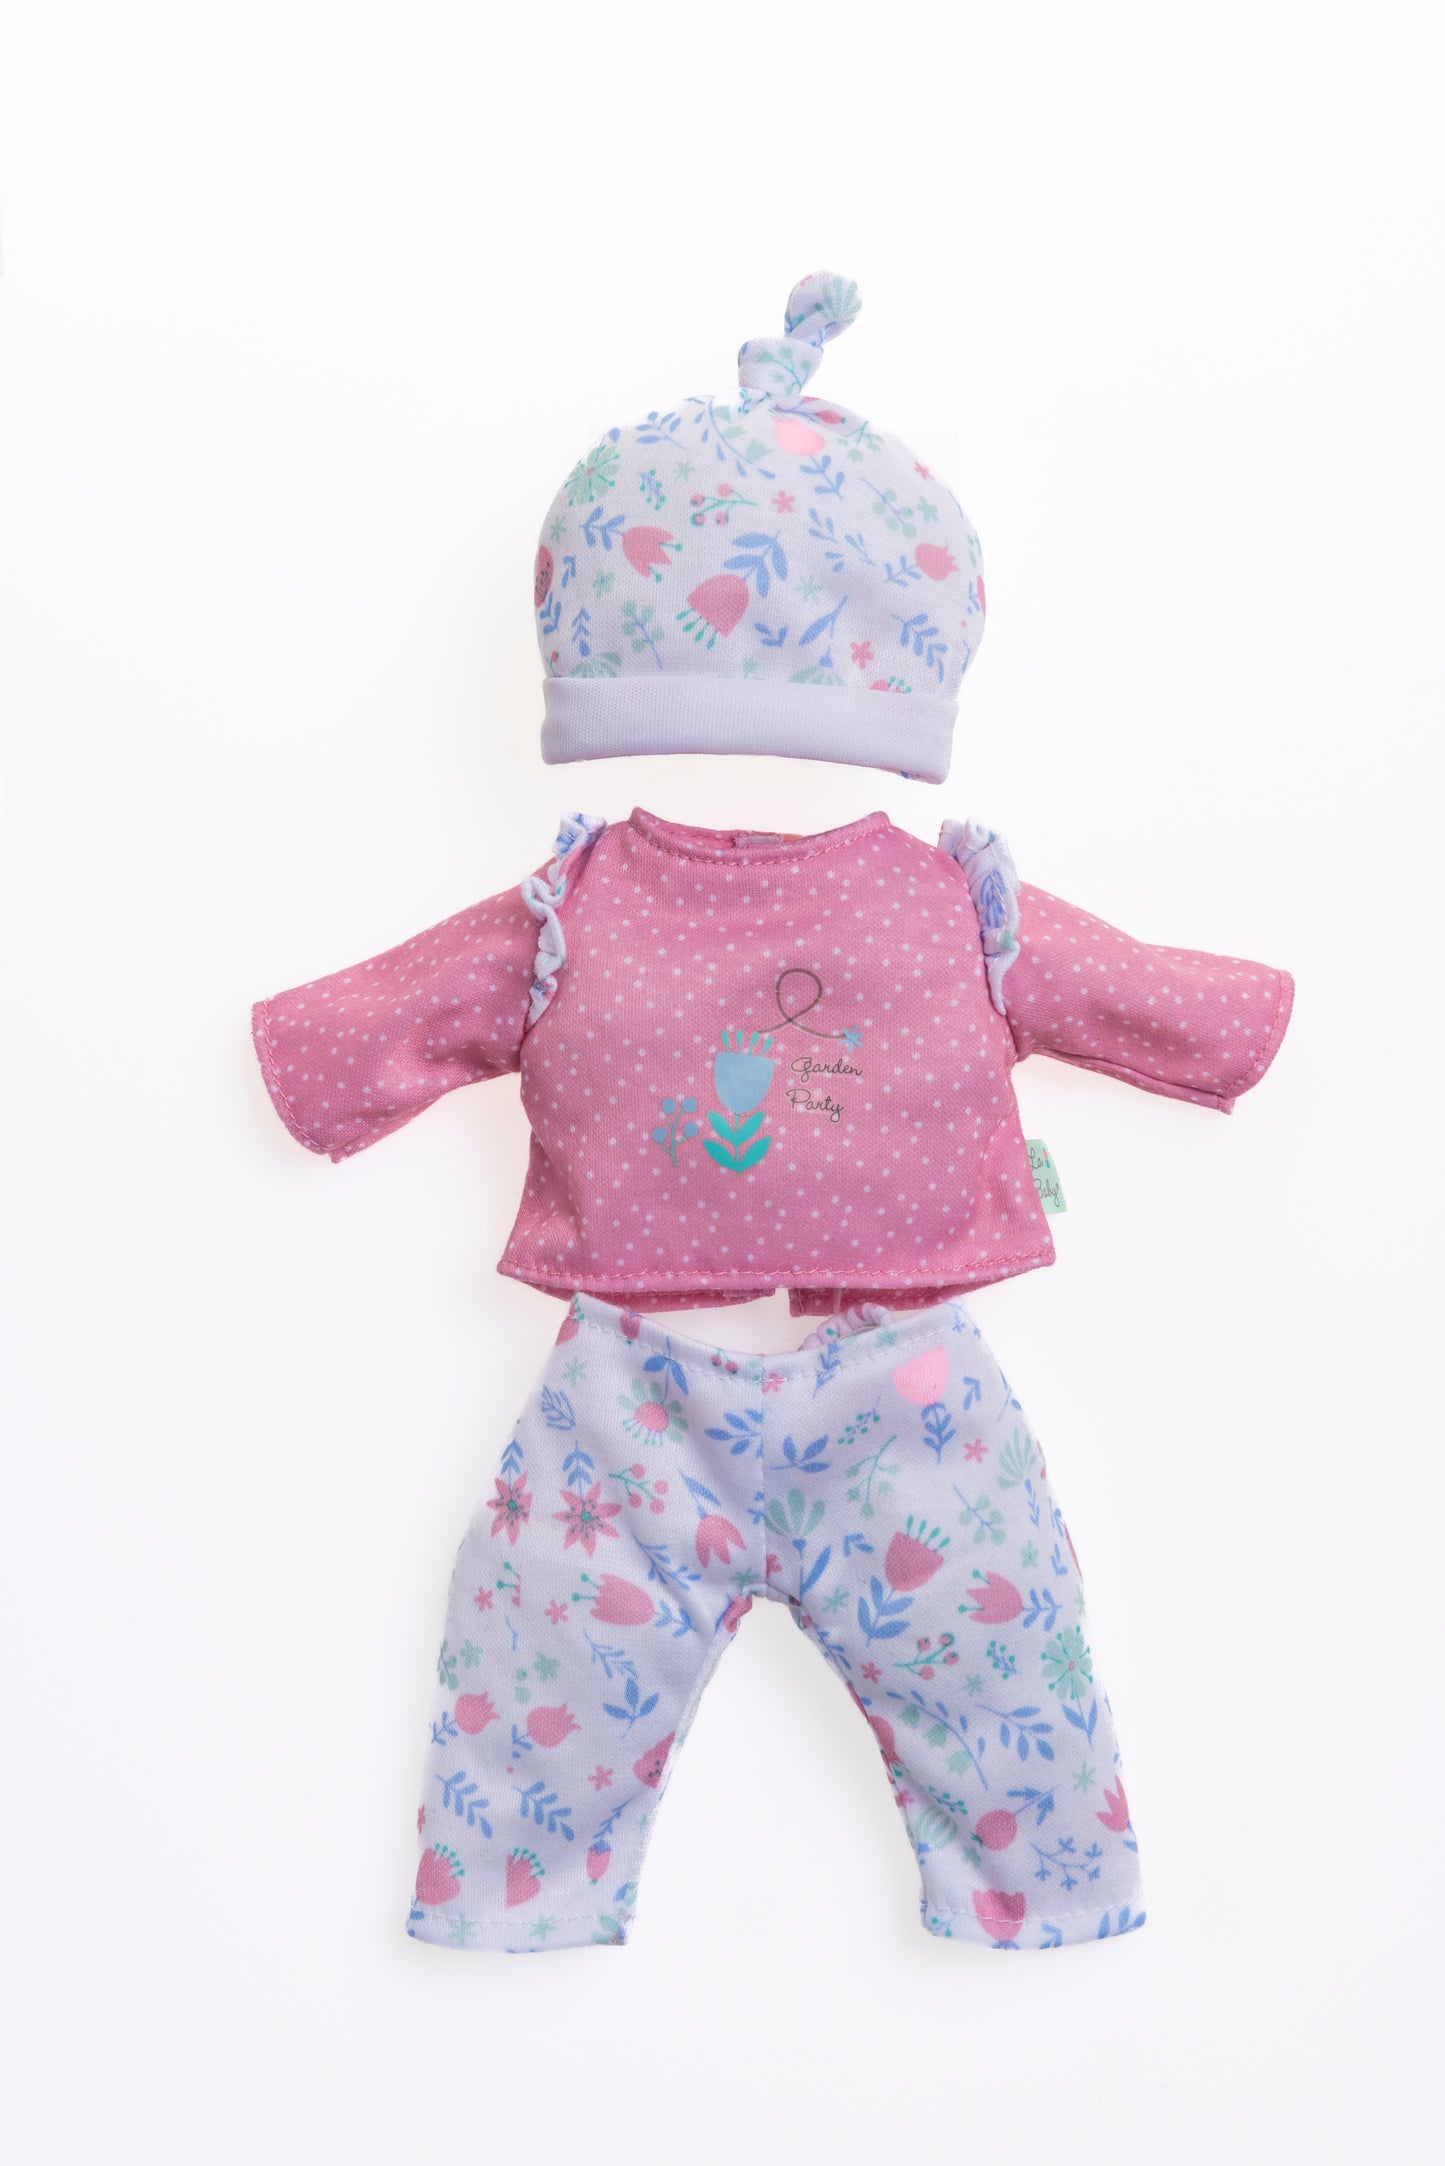 Berenguer Boutique ® FASHION Clothing for 14"-18" Dolls - Pink/White Floral 3 Piece.